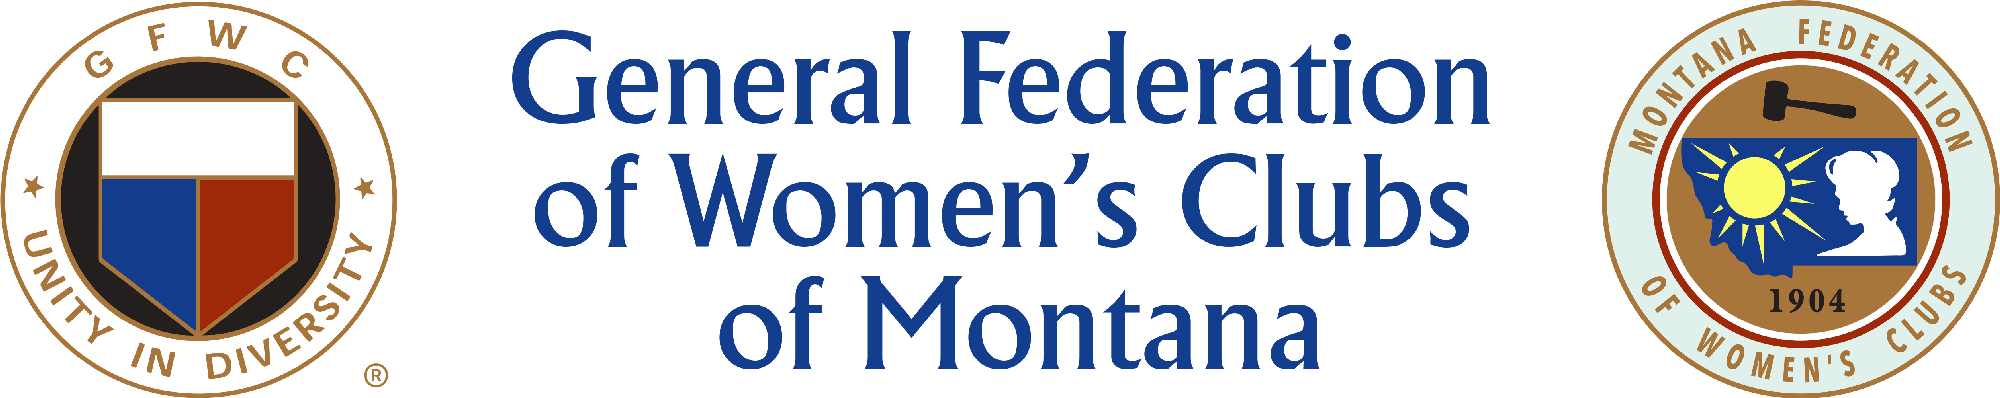 General Federation of Women's Clubs of Montana